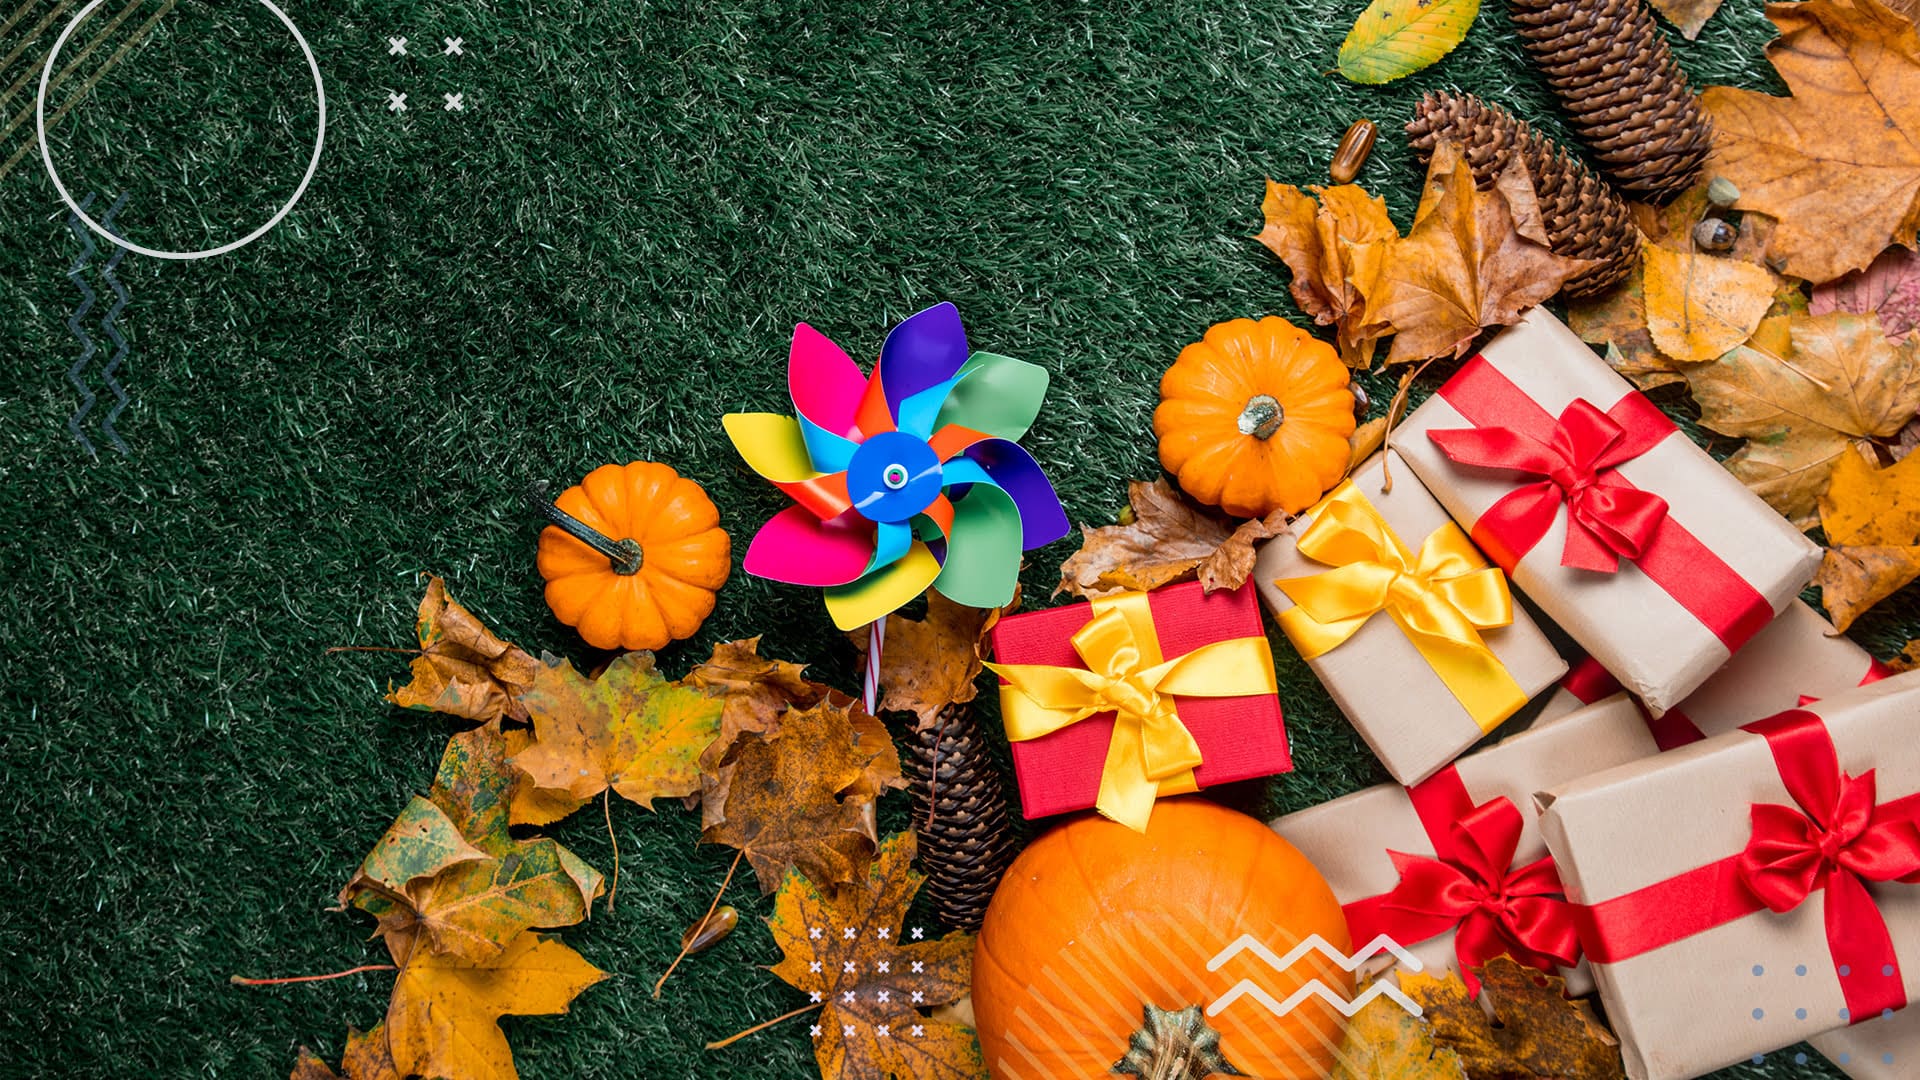 Pumpkins and gifts laying on green grass with yellow leaves surrounding them